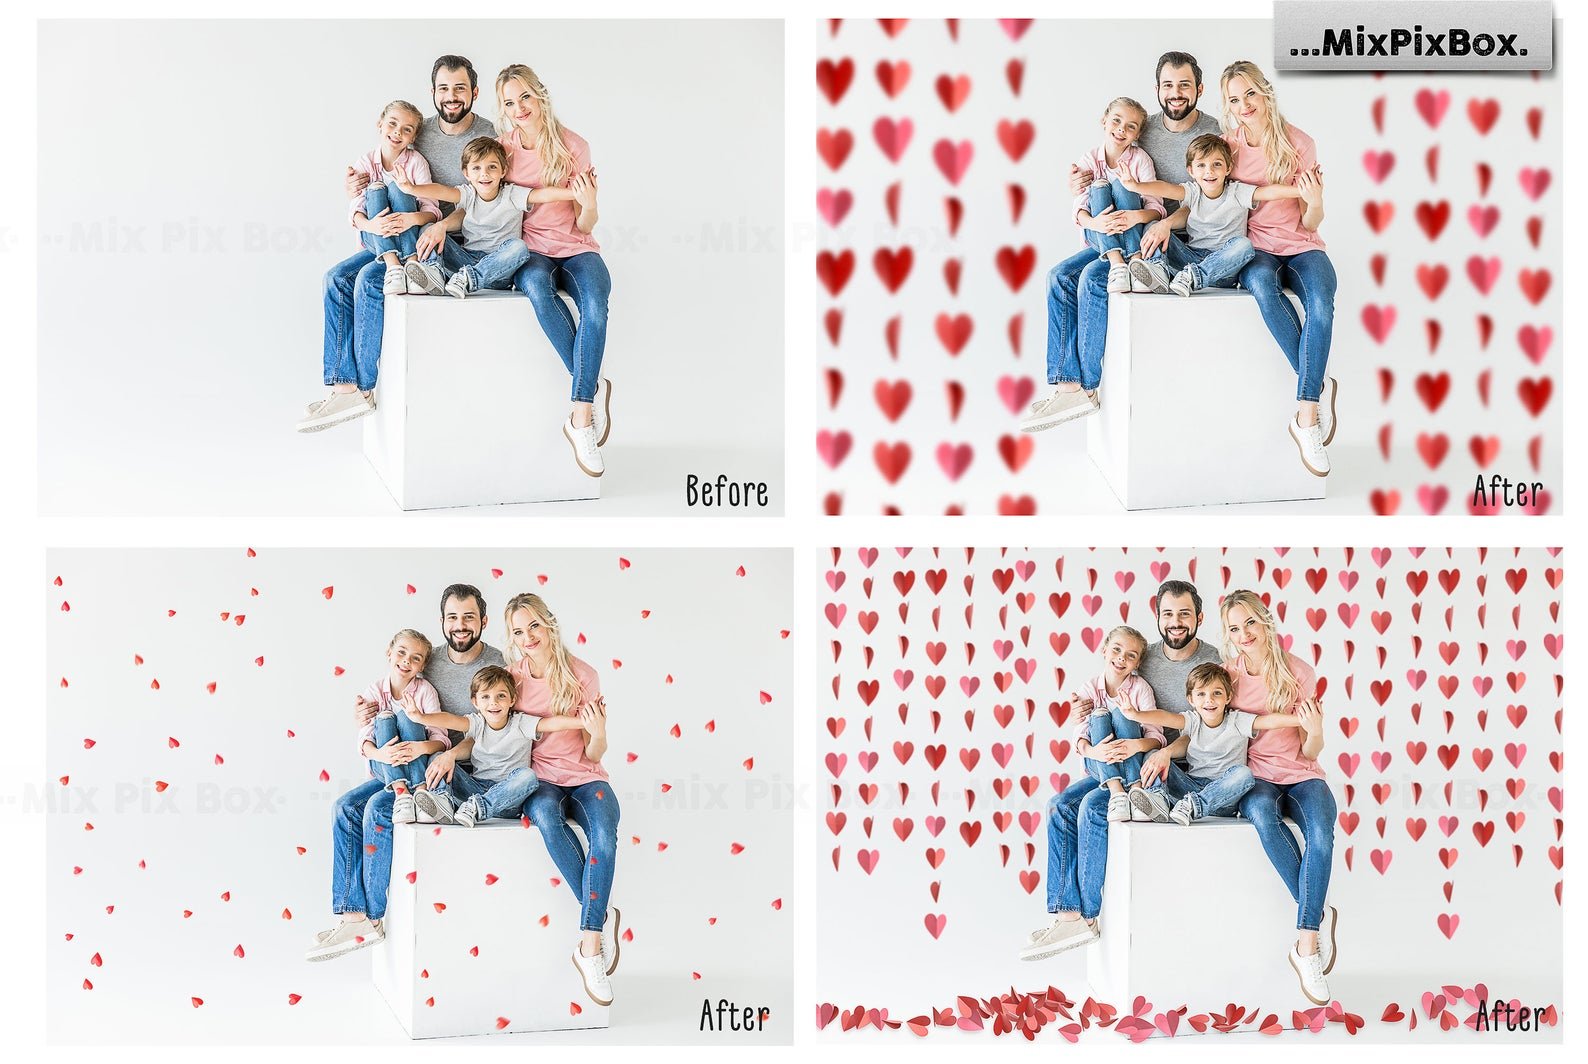 Red Paper Hearts Overlays